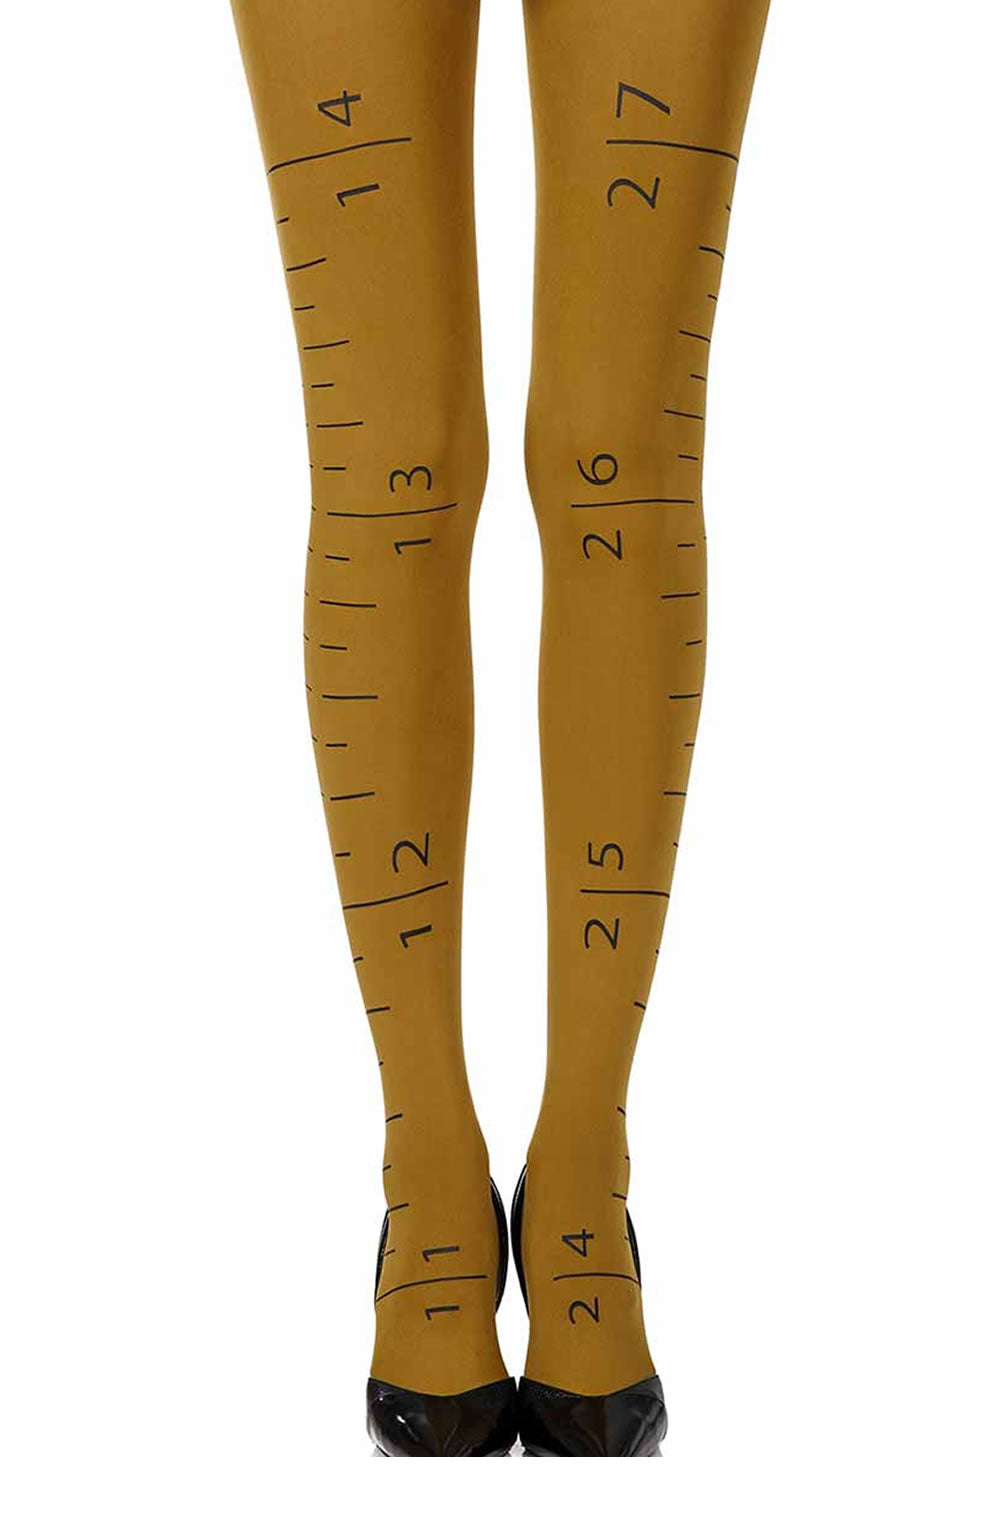 Zohara “Tape easure” ustard Print Tights  Hosiery, NEWLY-IMPORTED, Tights, Zohara - So Luxe Lingerie